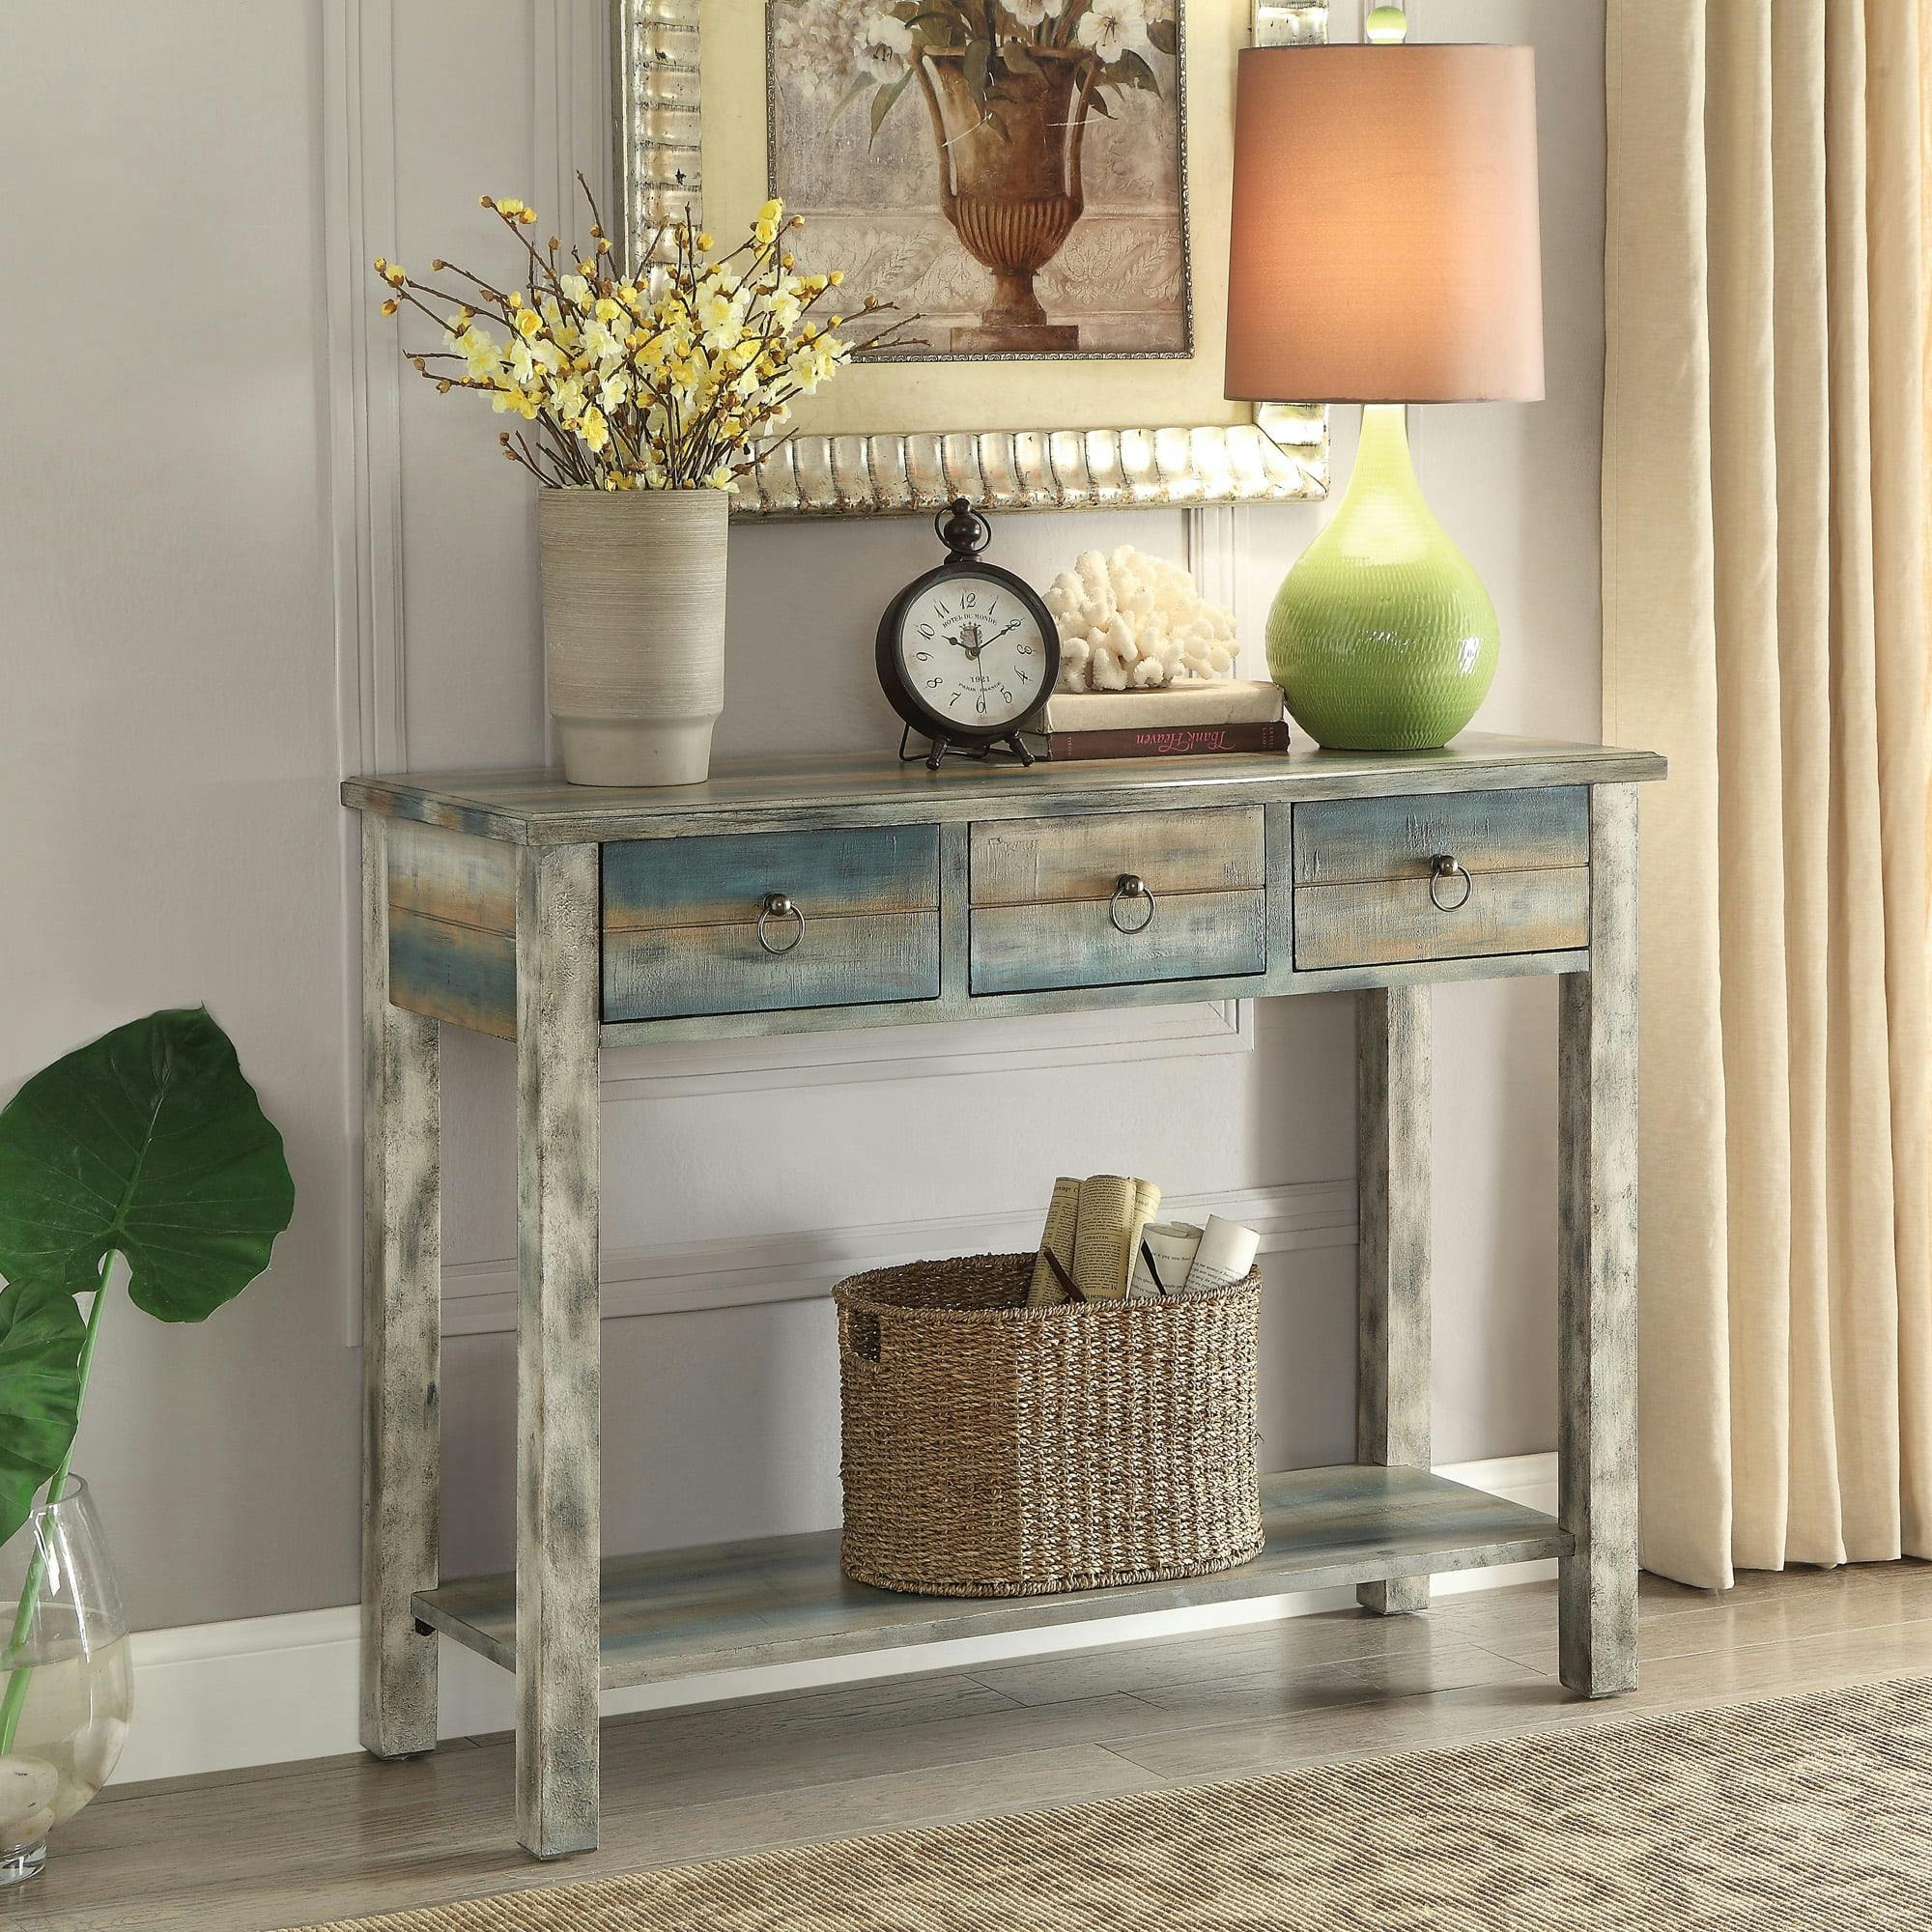 Antique White and Teal Wood Console Table with Storage